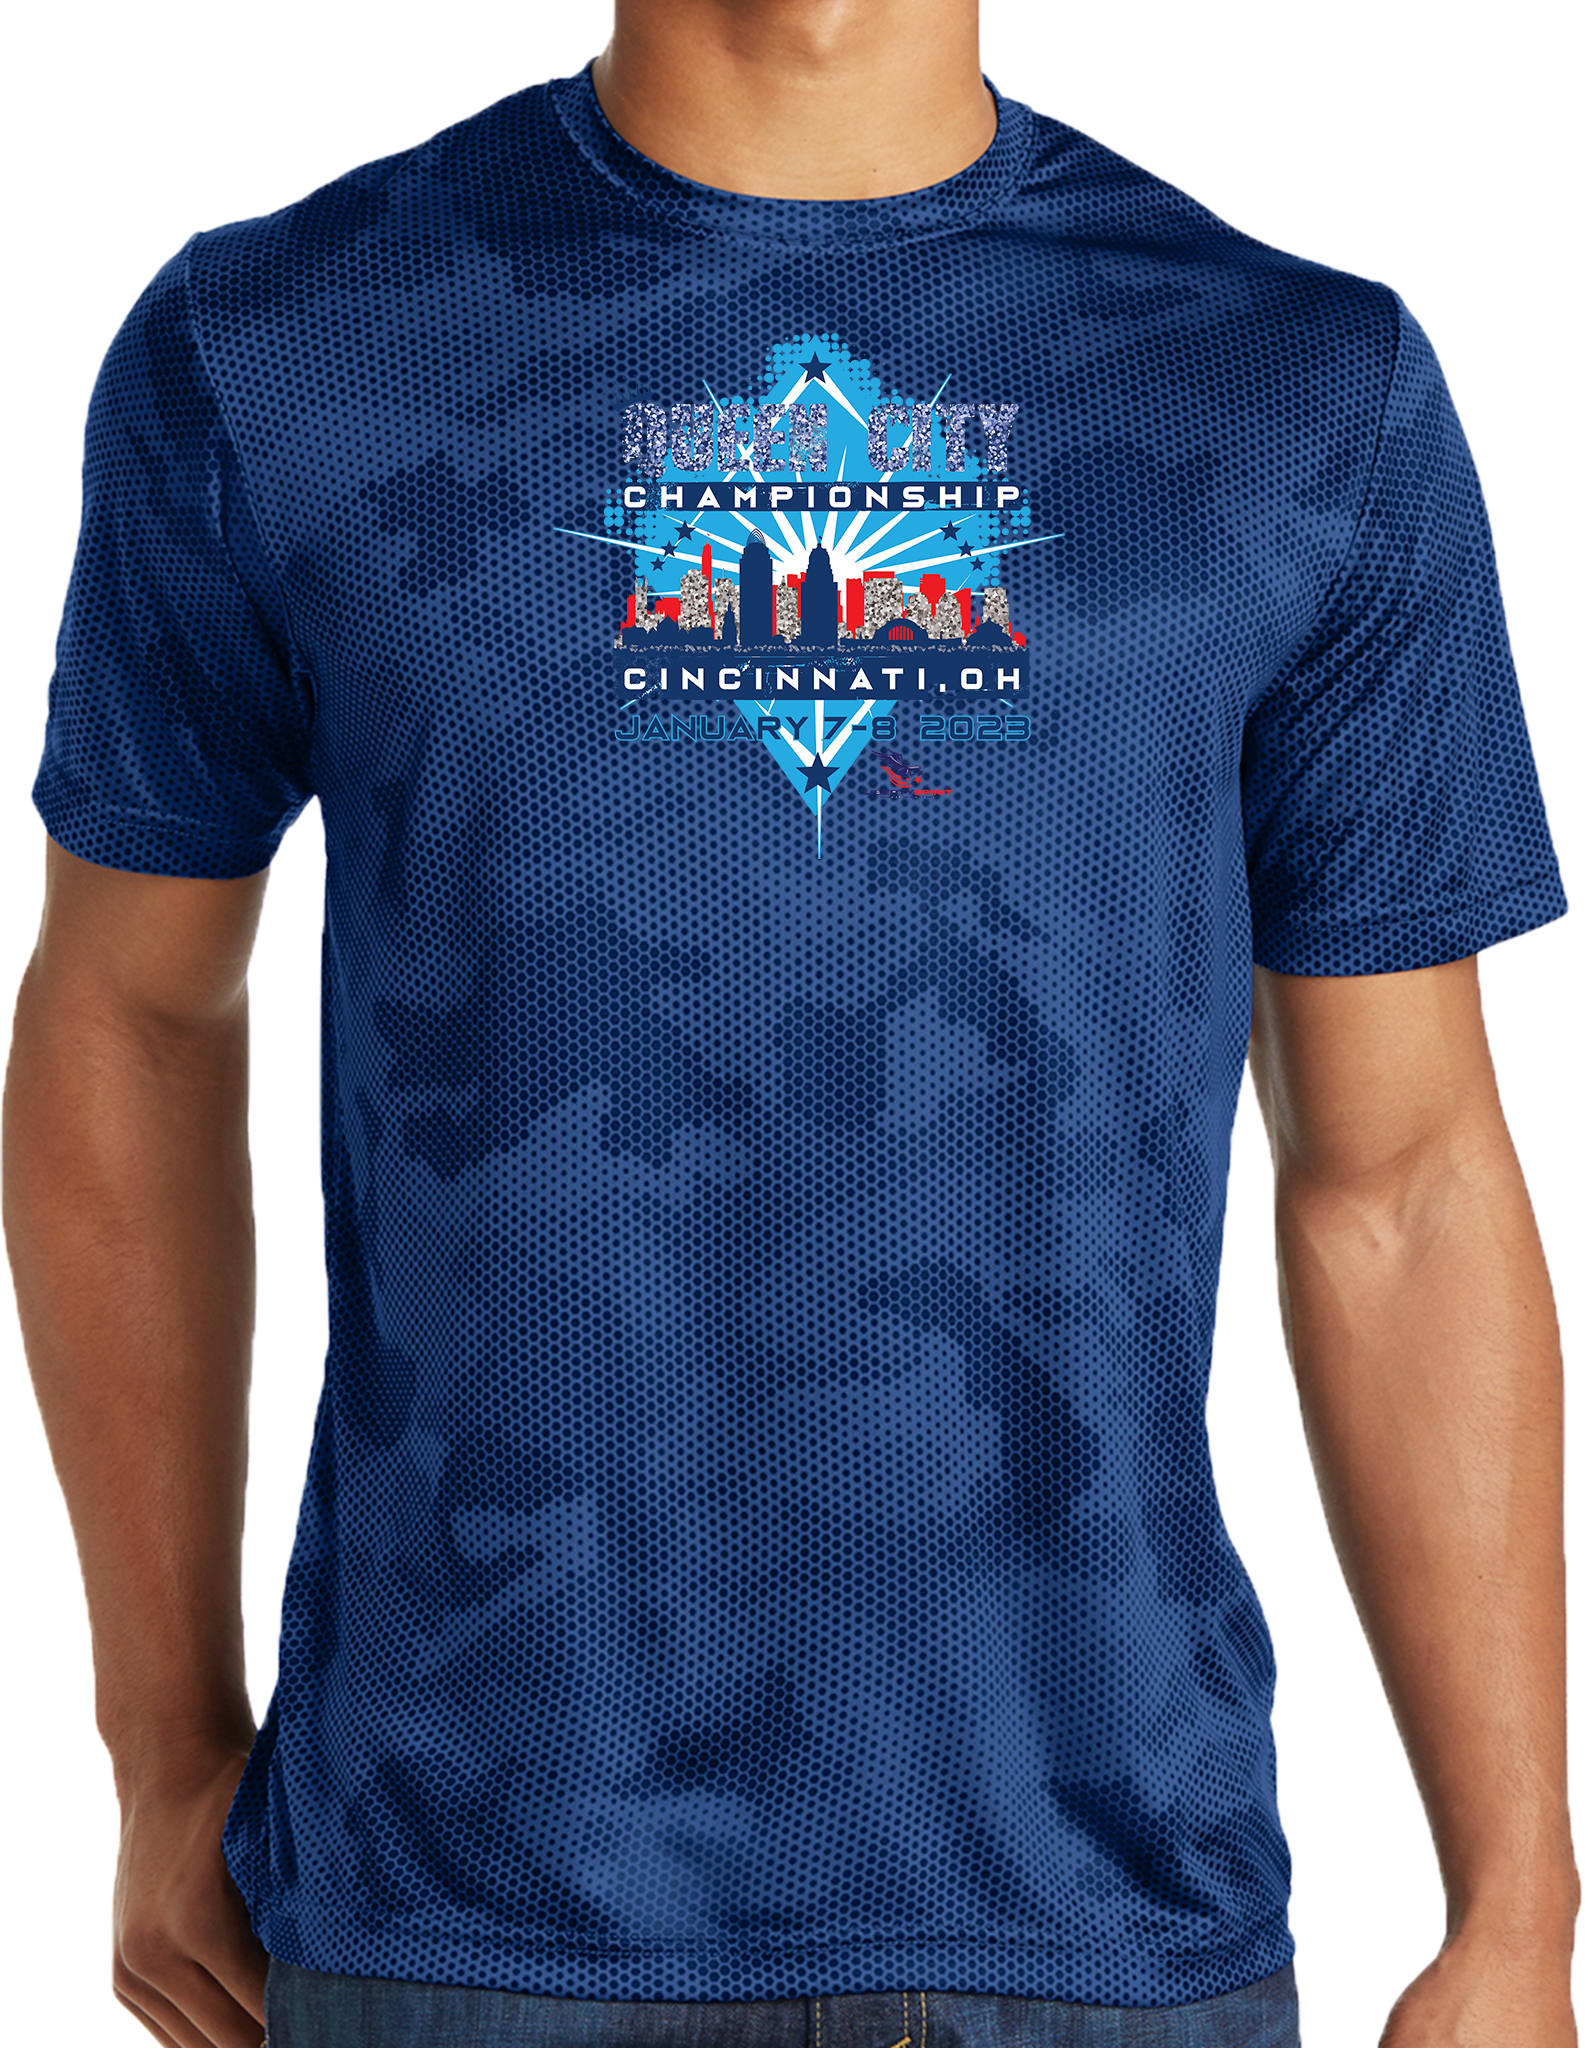 PERFORMANCE SHIRTS - 2023 Queen City Championship